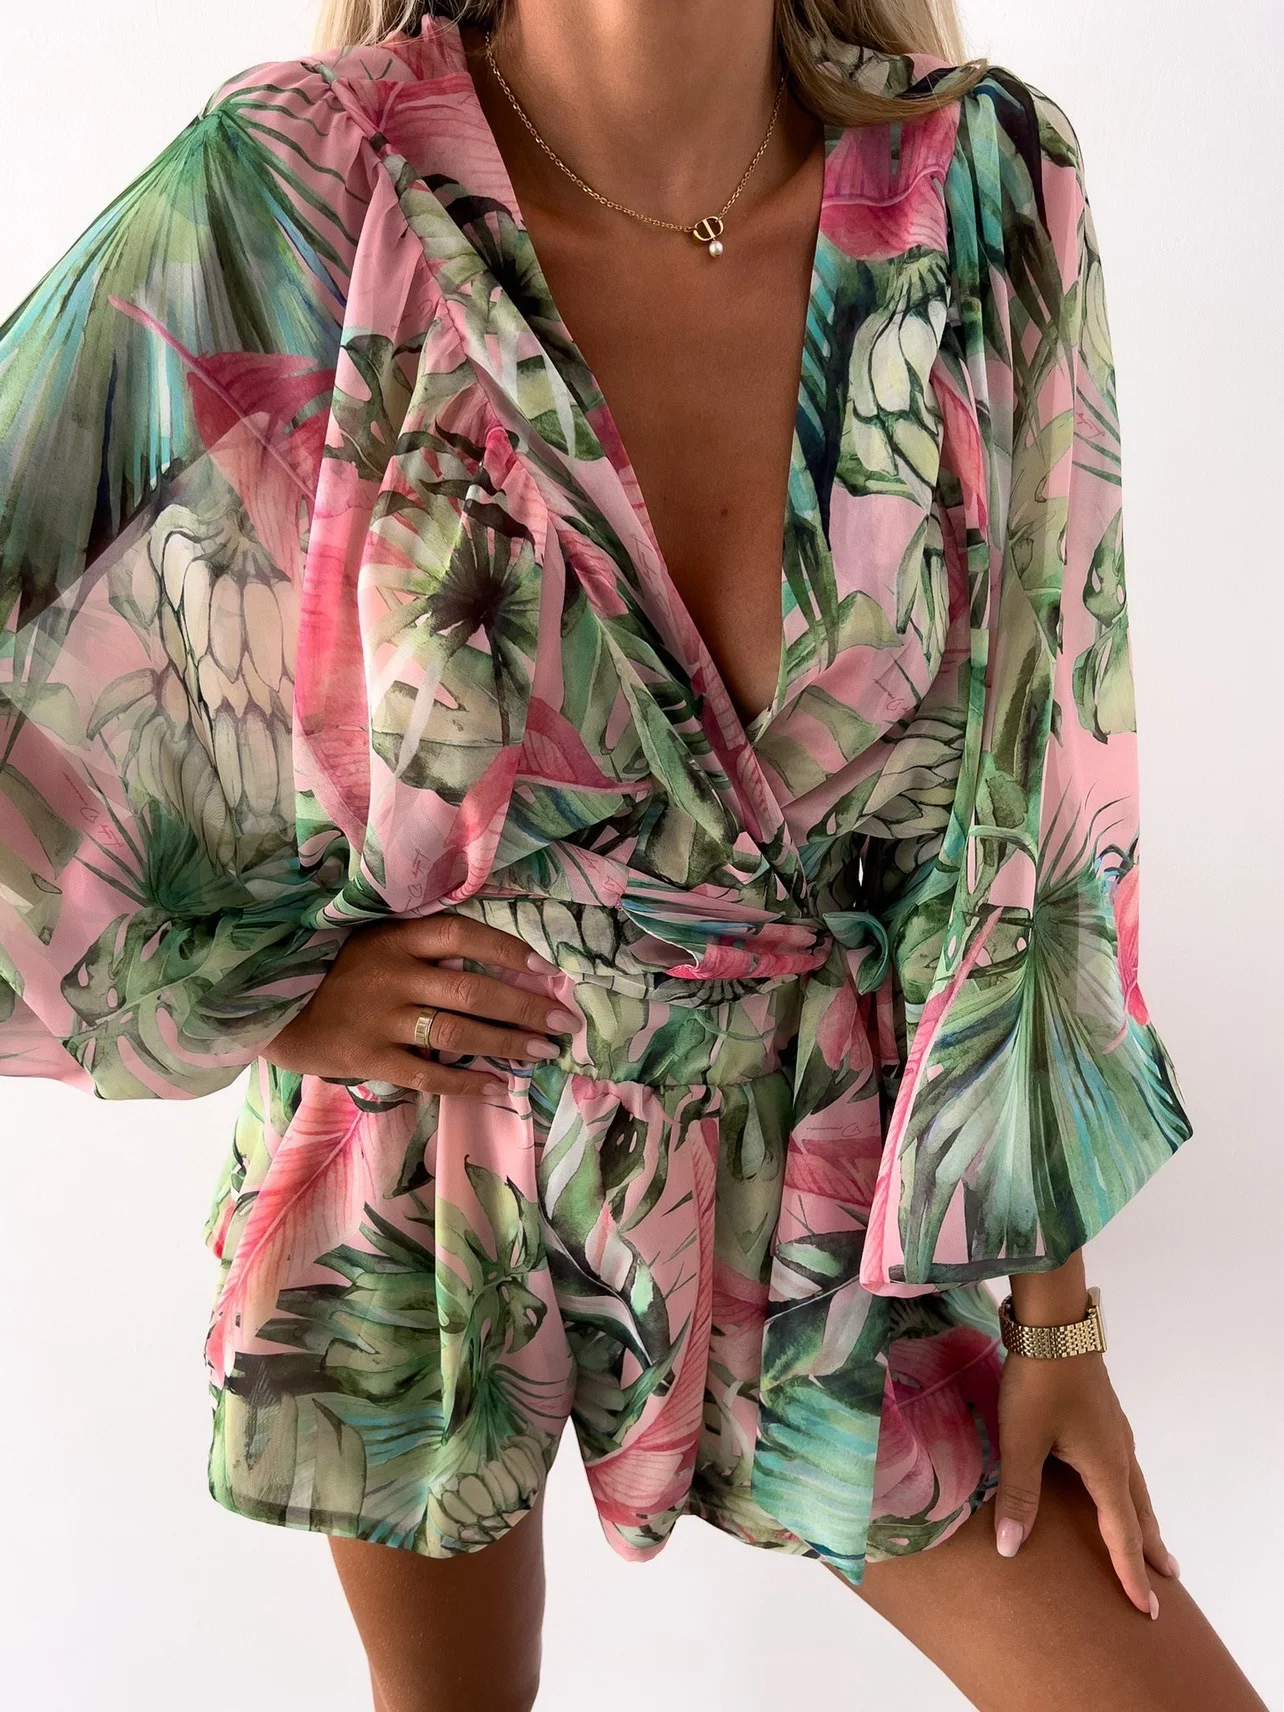 2023 Sexy Deep V Neck Jumpsuit For Women Summer Casual Boho Beach Vacation Outfit Fashion Print Lantern Sleeve Rompers Shorts 2021 sexy v neck print jumpsuits summer women casual long sleeve ladies boho casual flared pants